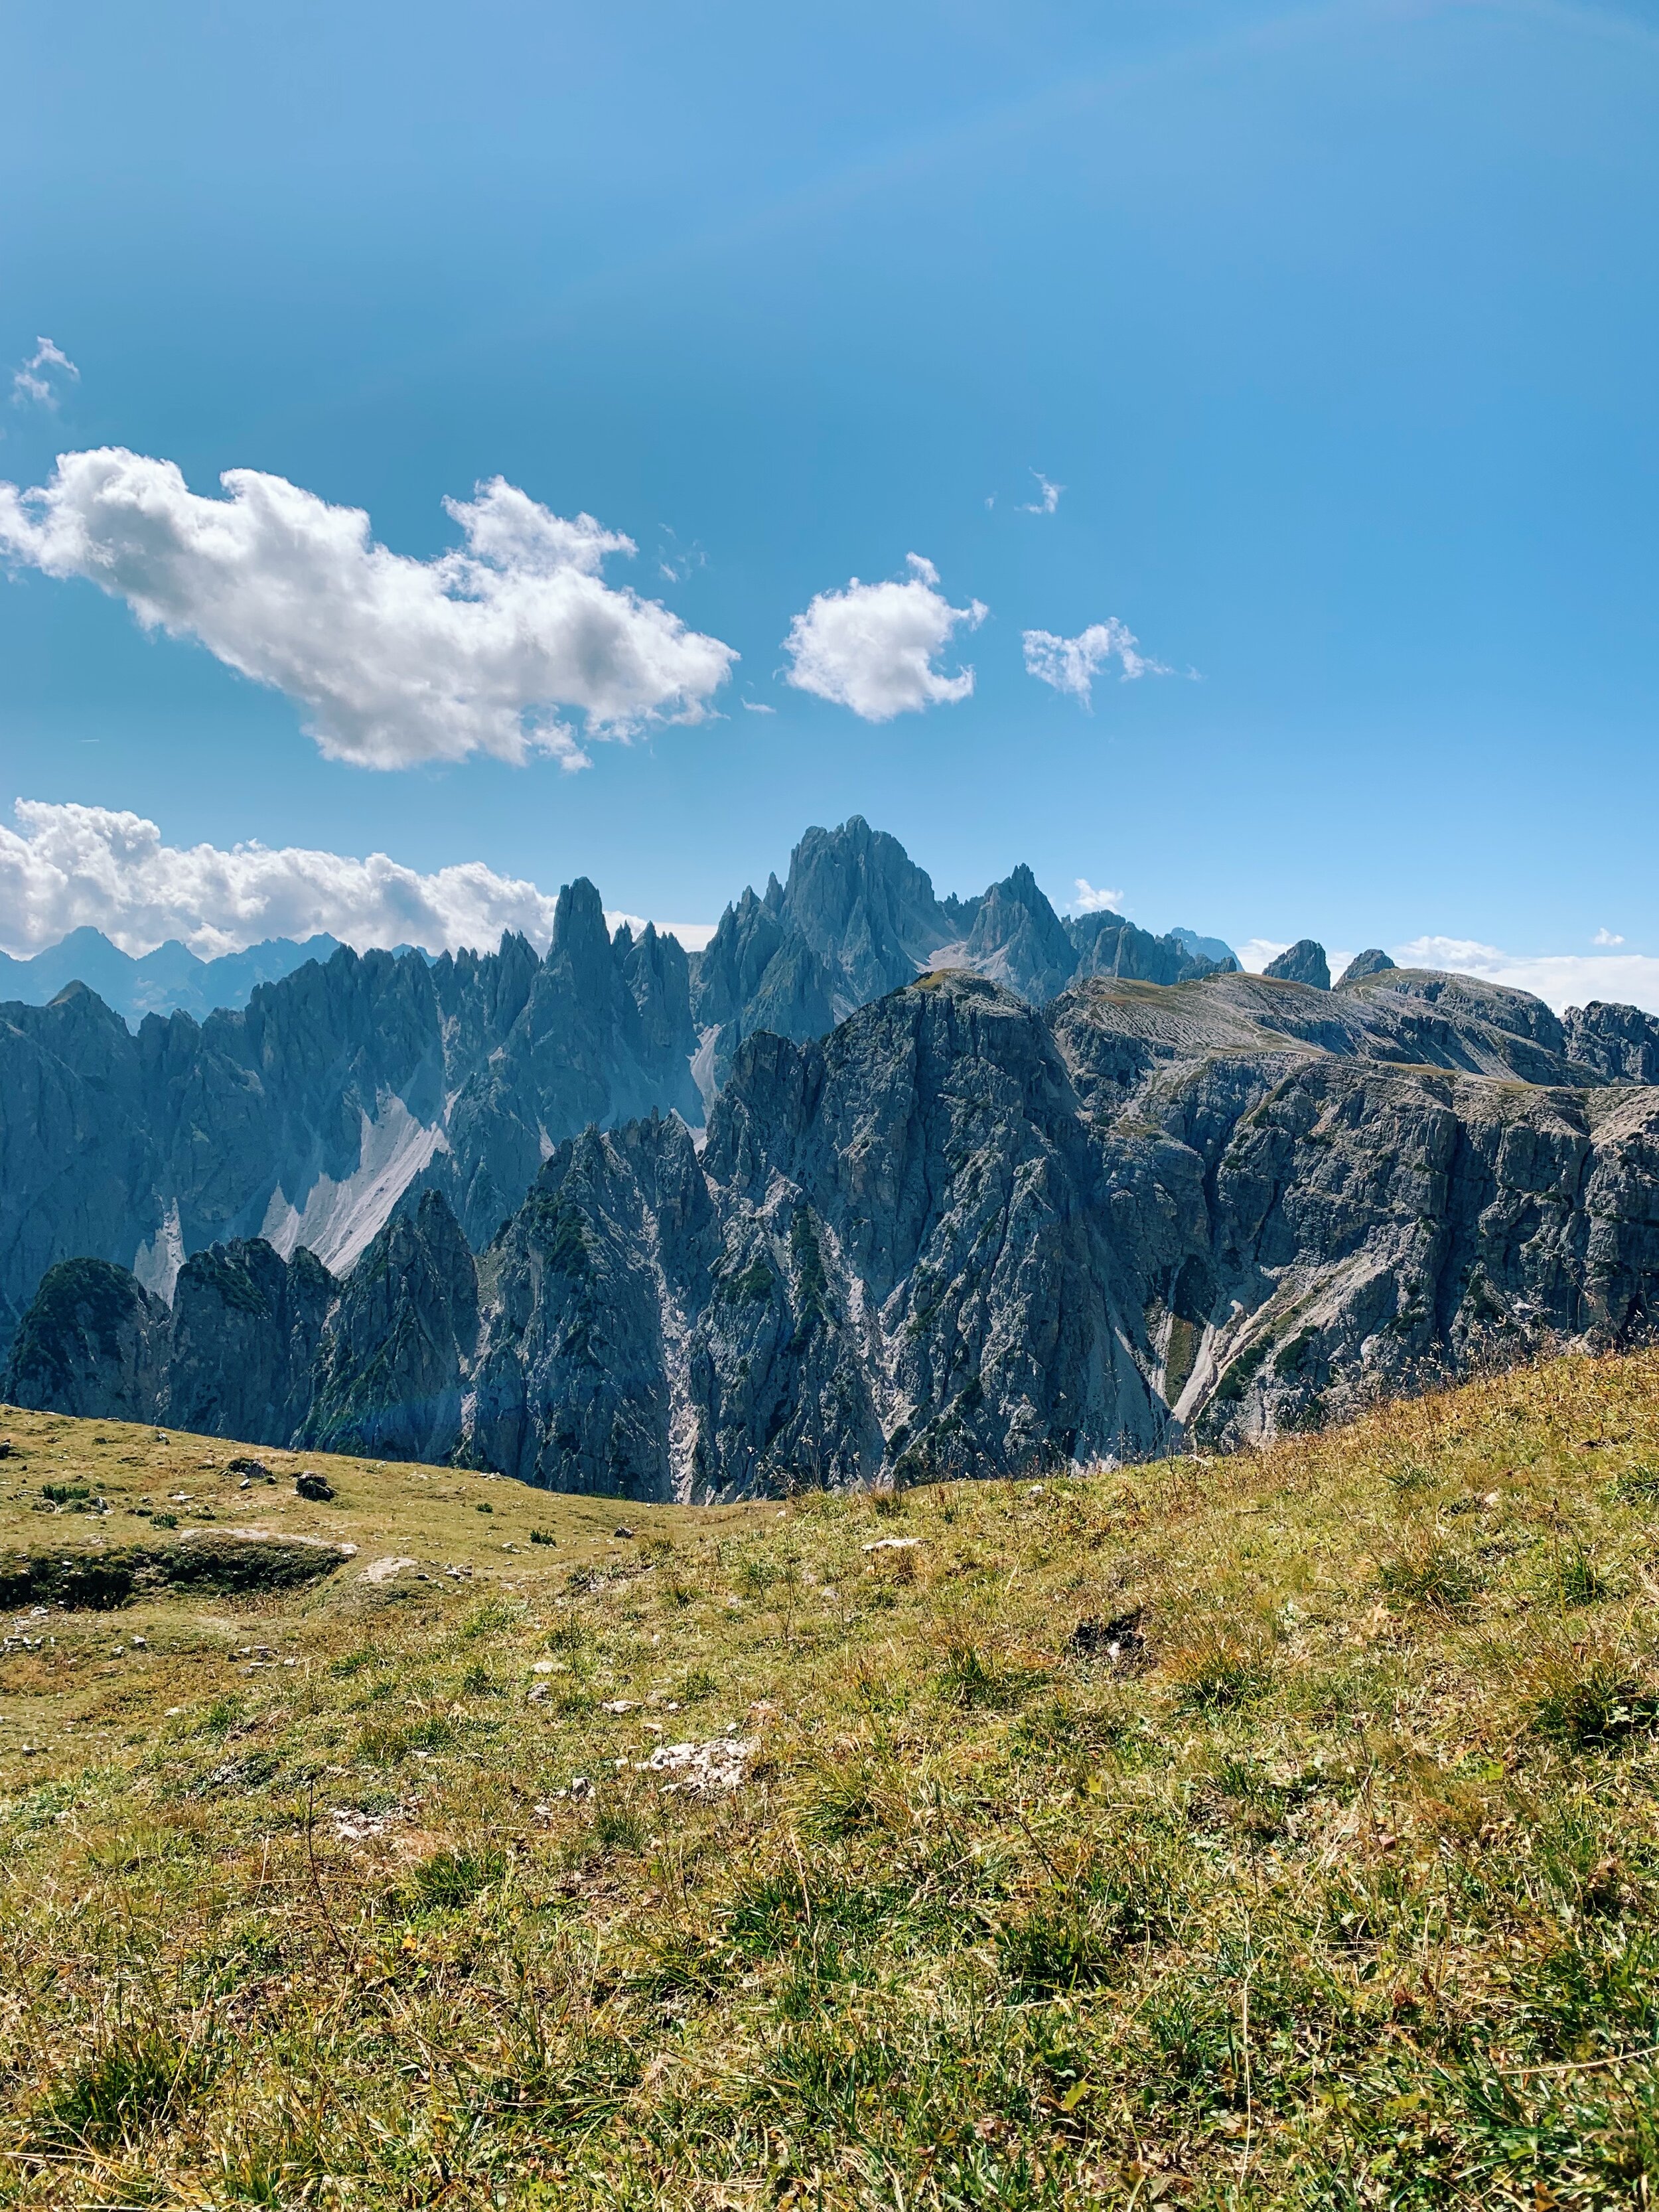  This particular cluster of Dolomites reminded me of cathedral spires. Enchanting. 